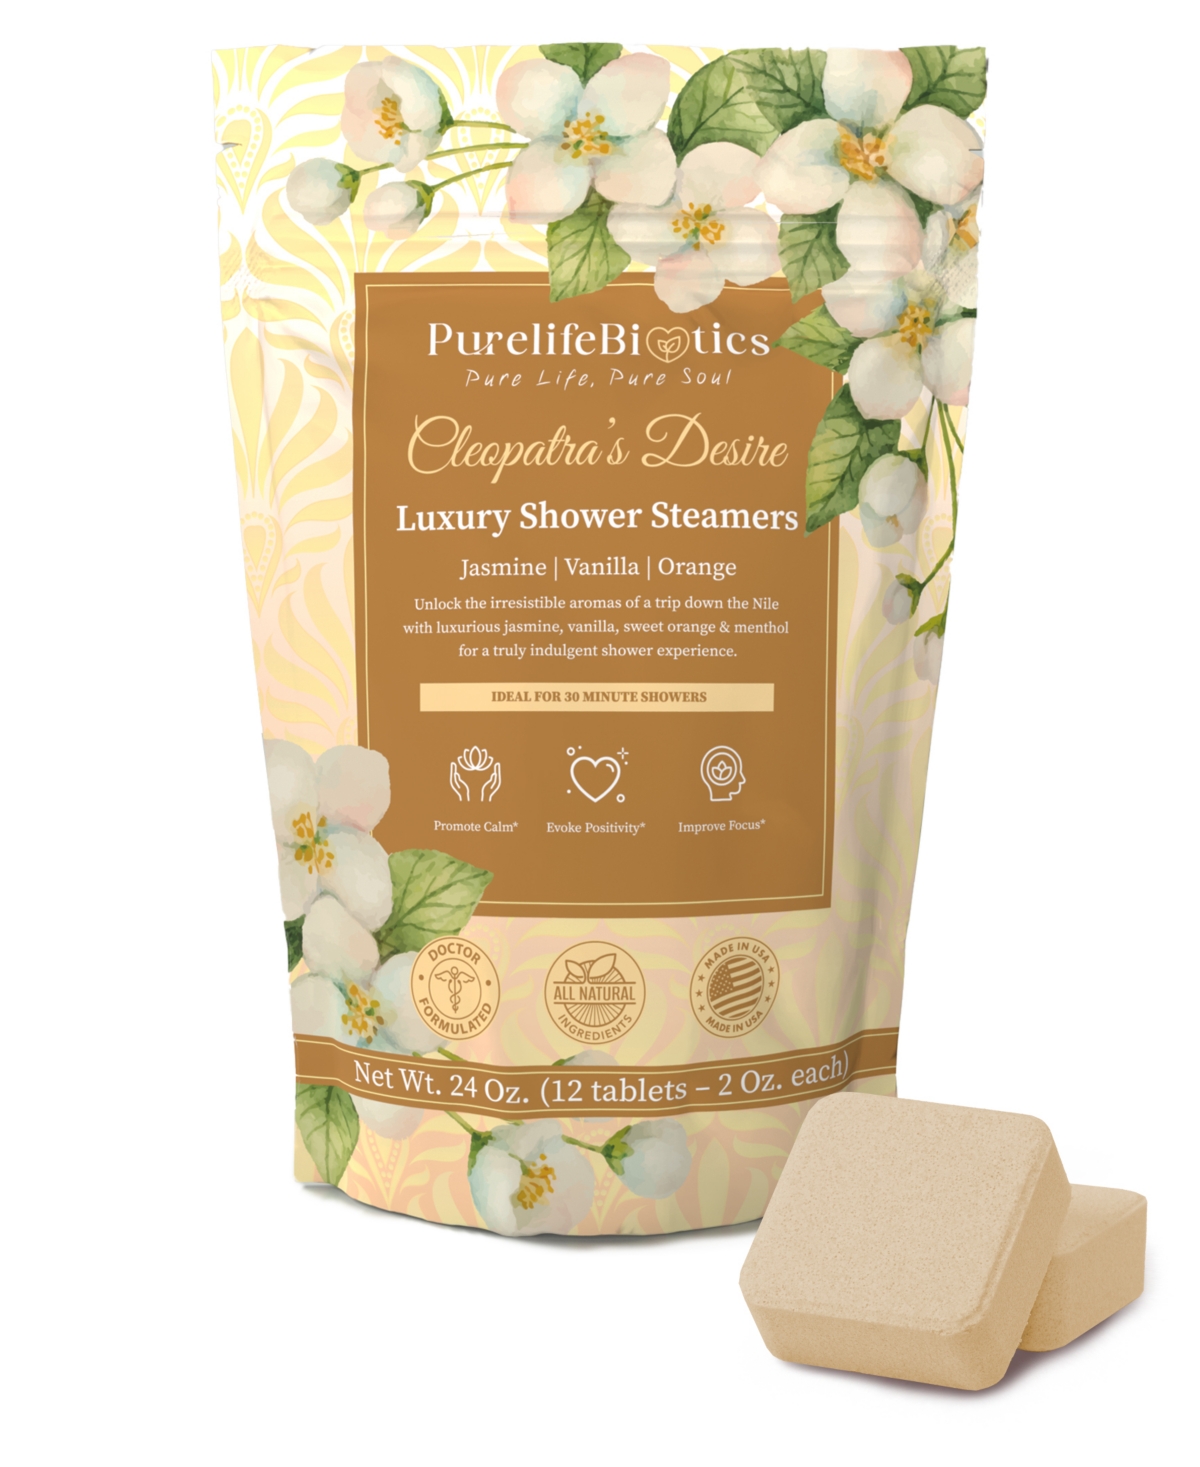 Aromatherapy Shower Steamers, 100% Pure Essential Oils, All Natural, Usa Handmade Shower Melts, Body Care Set for Reducing Stress, Enhancing Focus & R